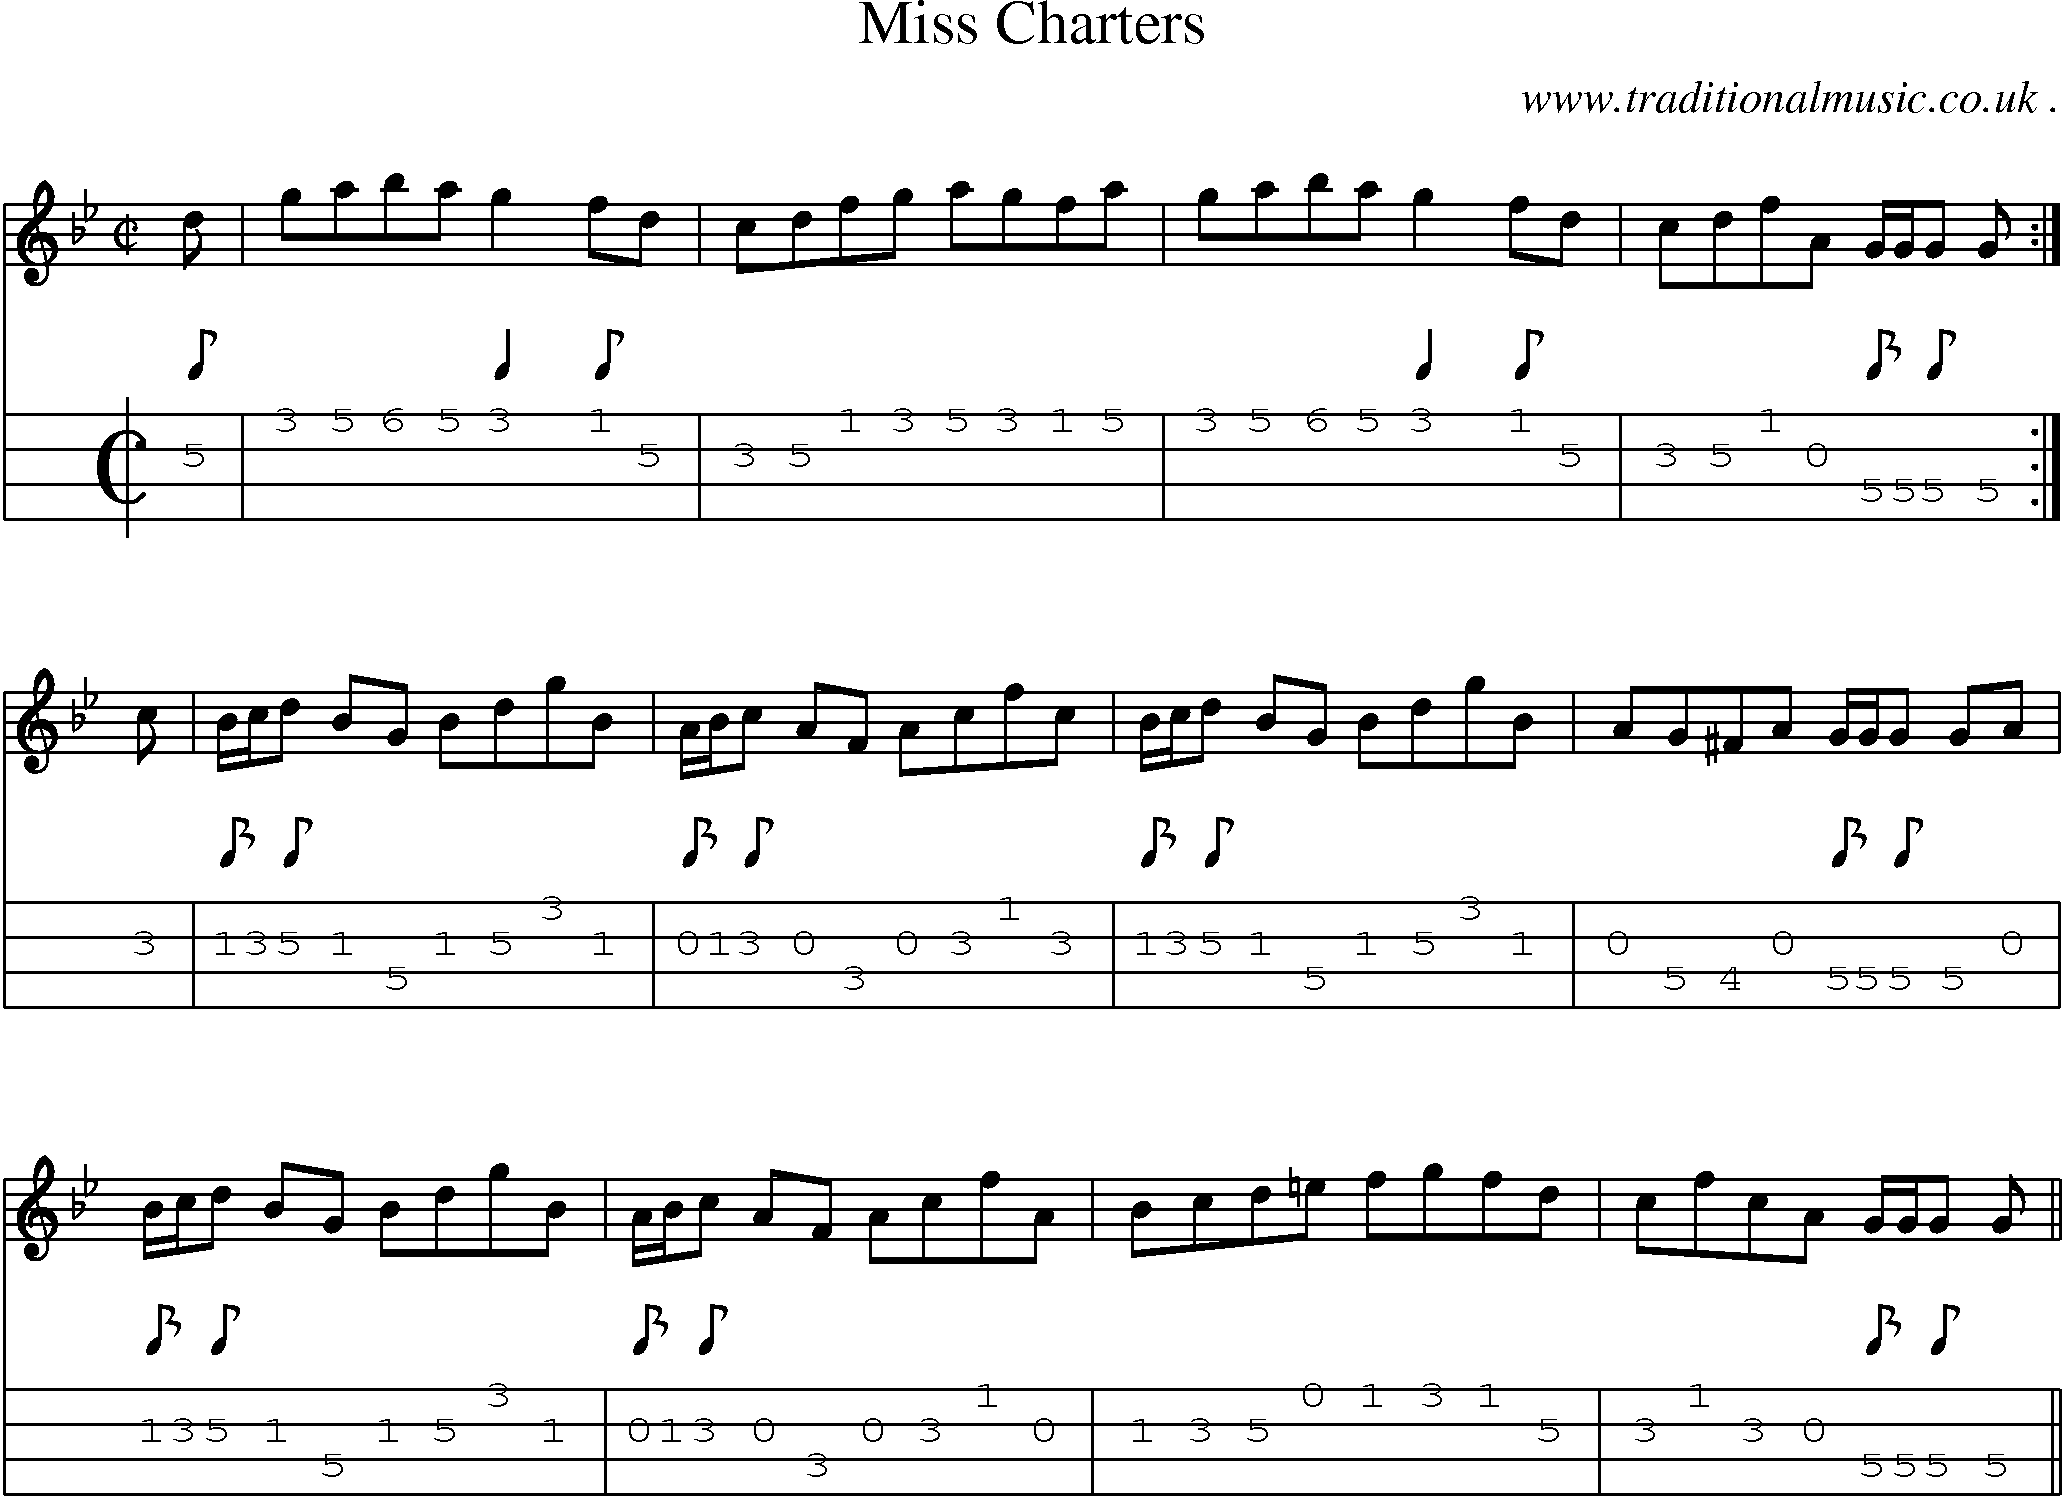 Sheet-music  score, Chords and Mandolin Tabs for Miss Charters